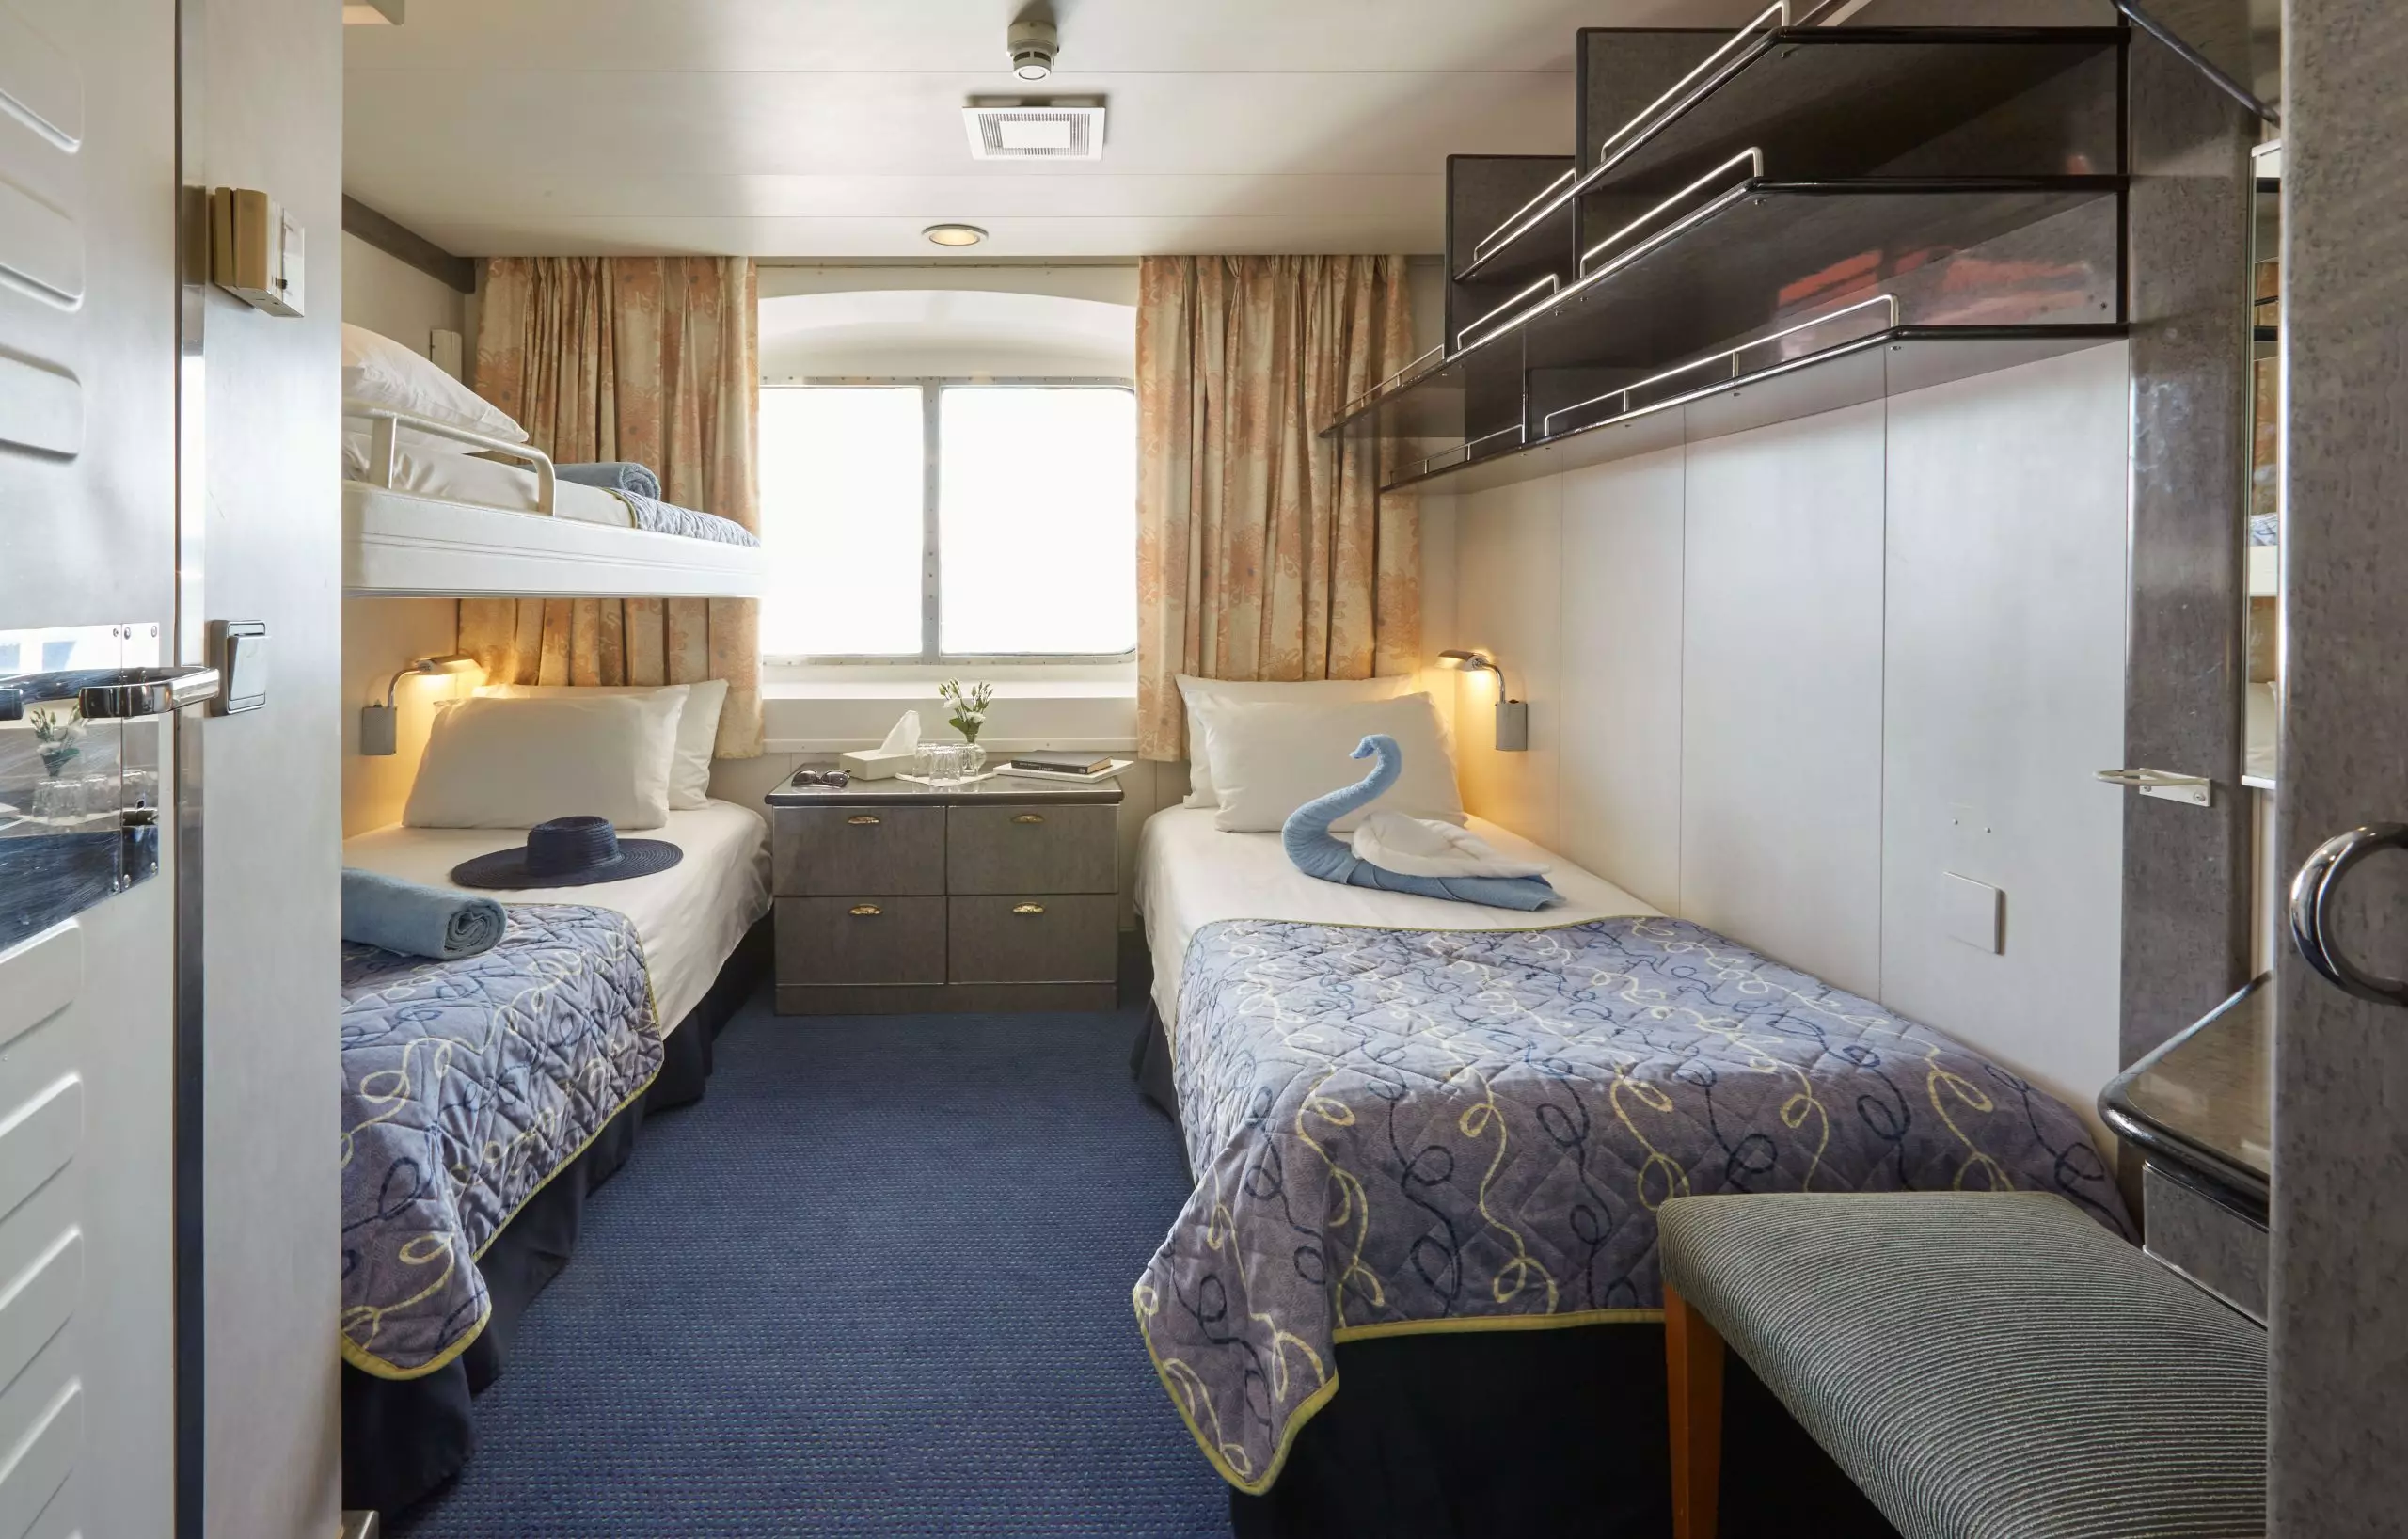 crystal-staterooms-xbo (1)